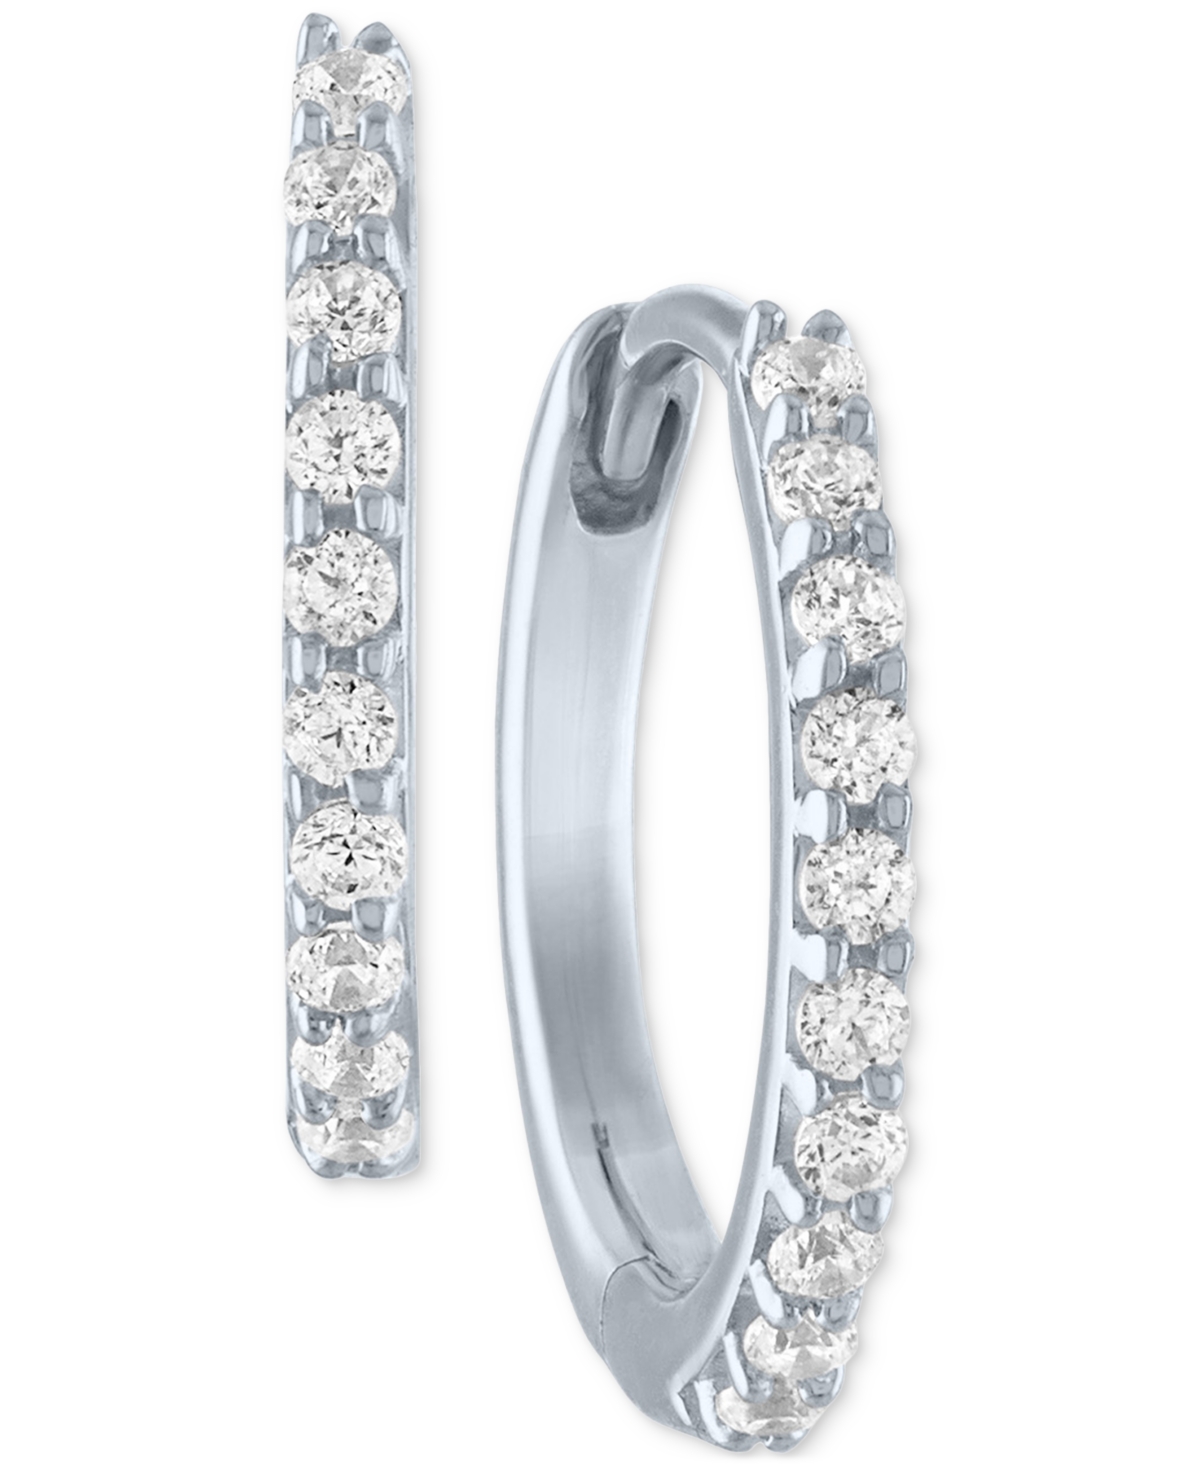 Lab-Created Diamond Extra Small Hoop Earrings (1/10 ct. t.w.) in 10k White or Yellow Gold - Yellow Gold